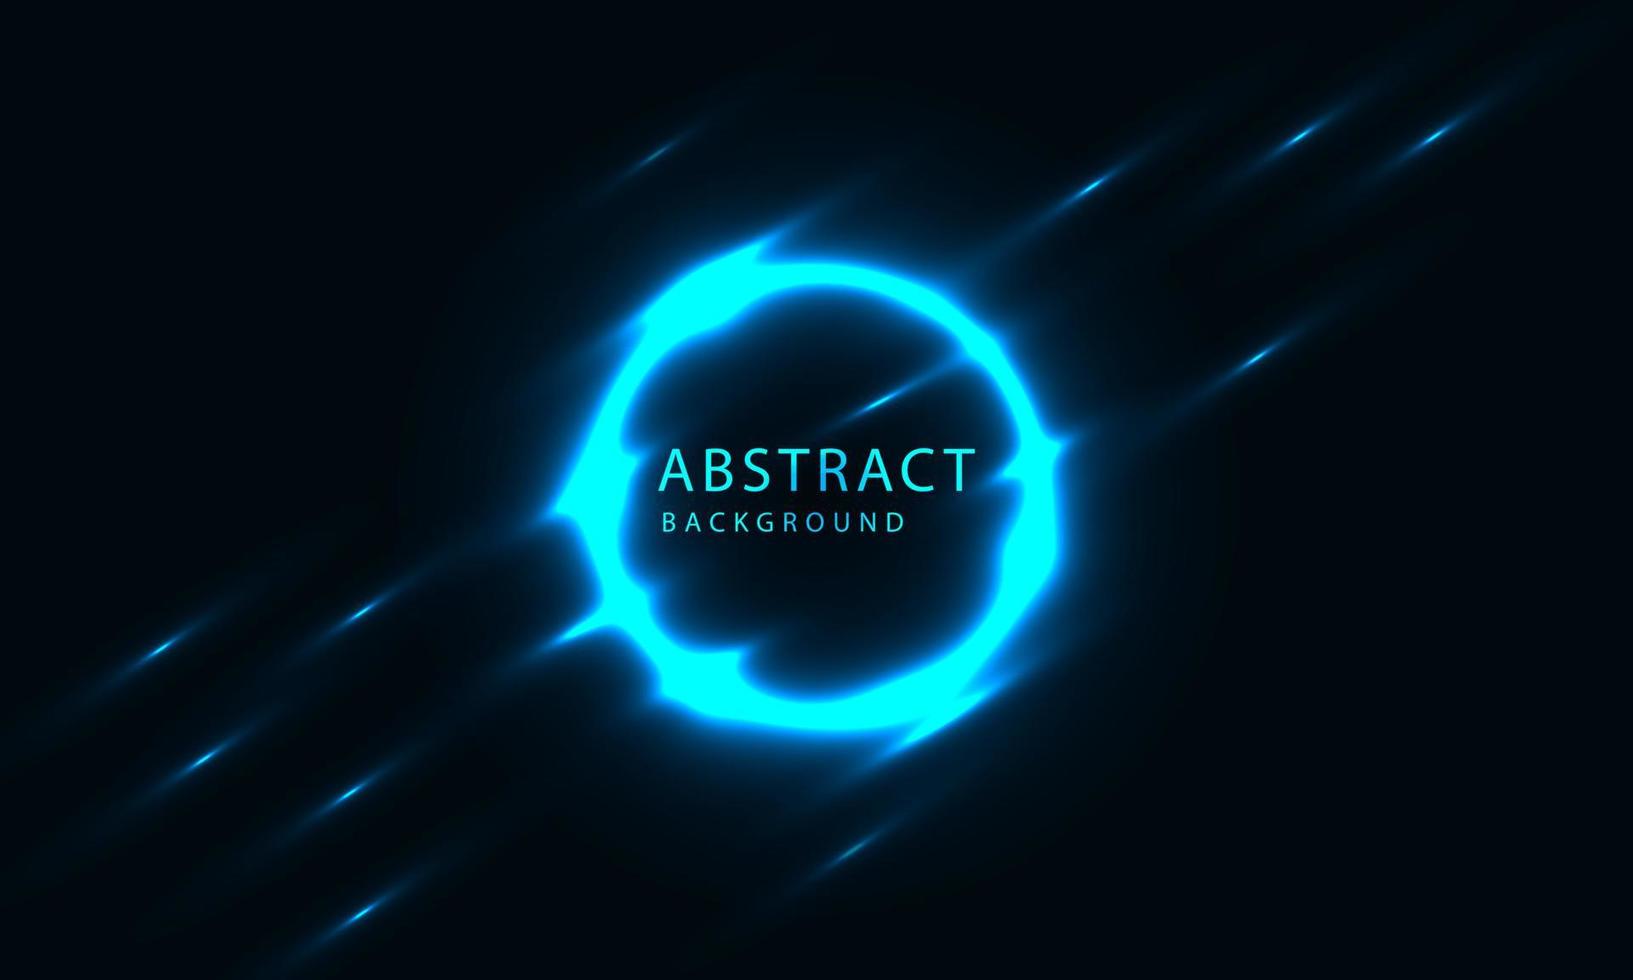 Futuristic Sci-Fi Abstract Blue Neon Light Shapes On Black Background. Exclusive wallpaper design for poster, brochure, presentation, website etc. vector